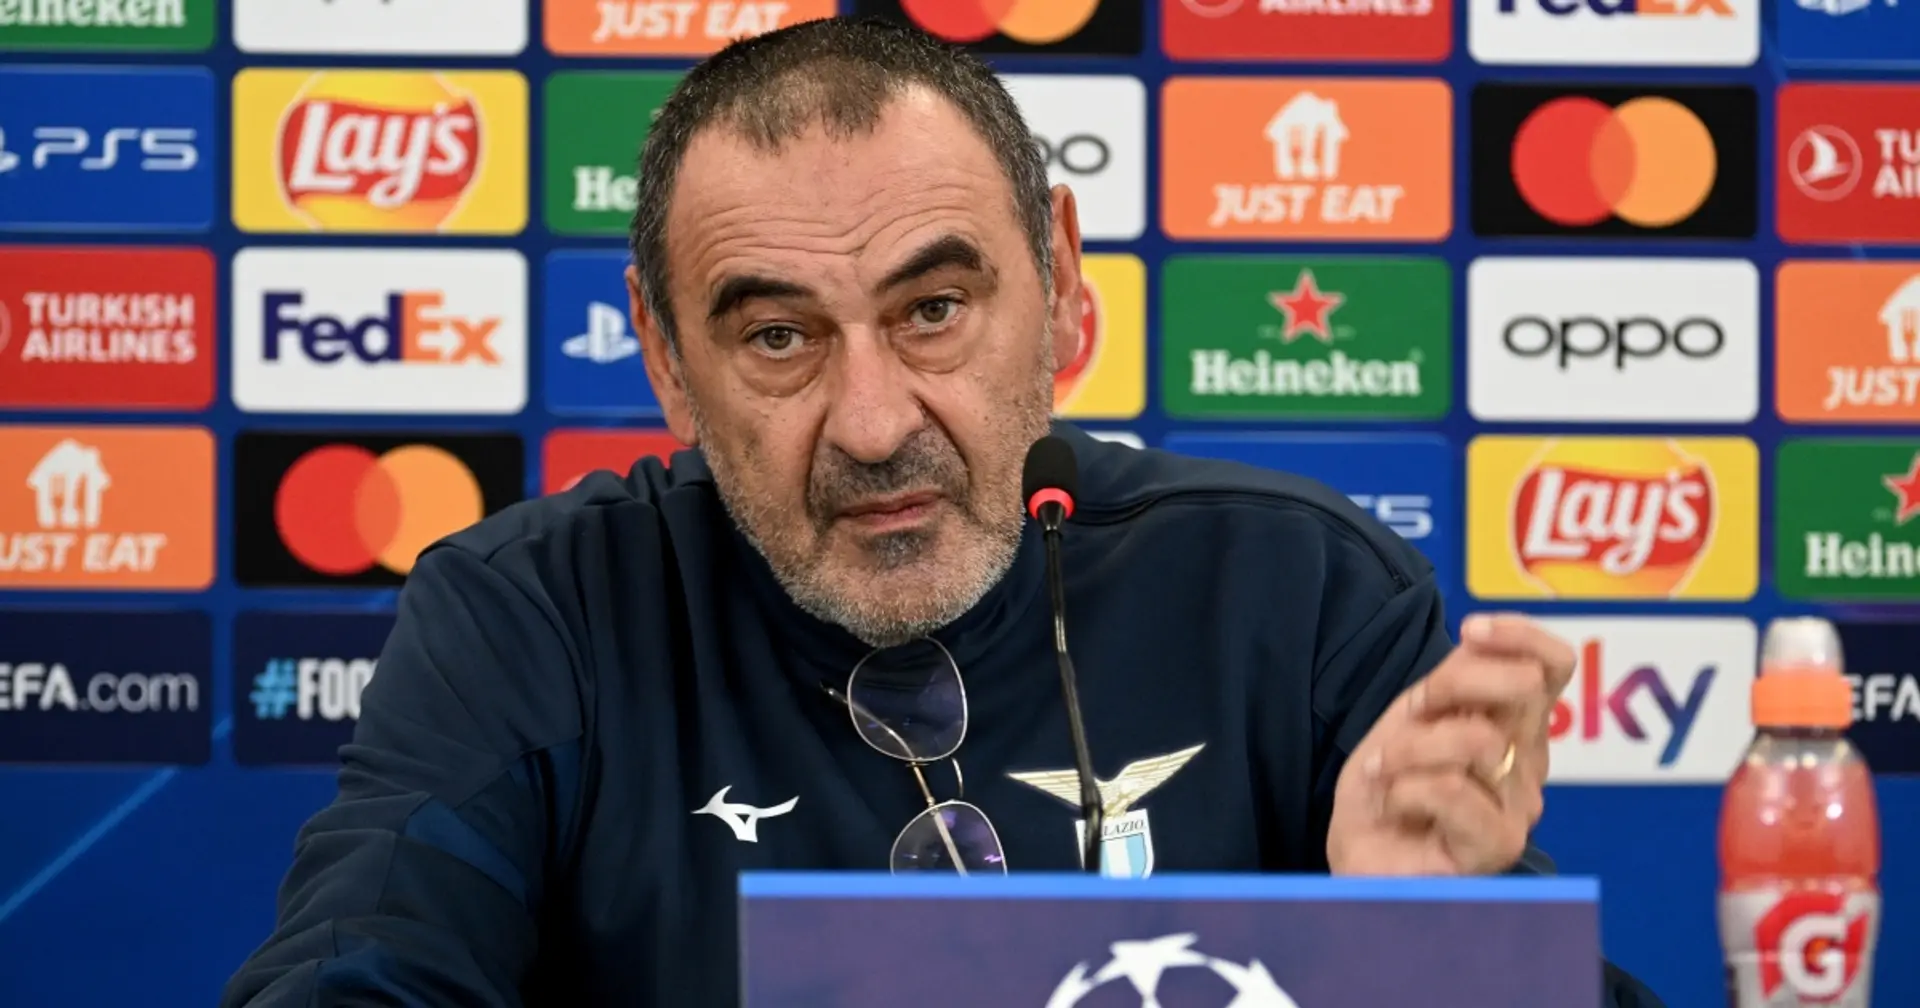 'I was wrong': Maurizio Sarri reveals regrets over Chelsea exit